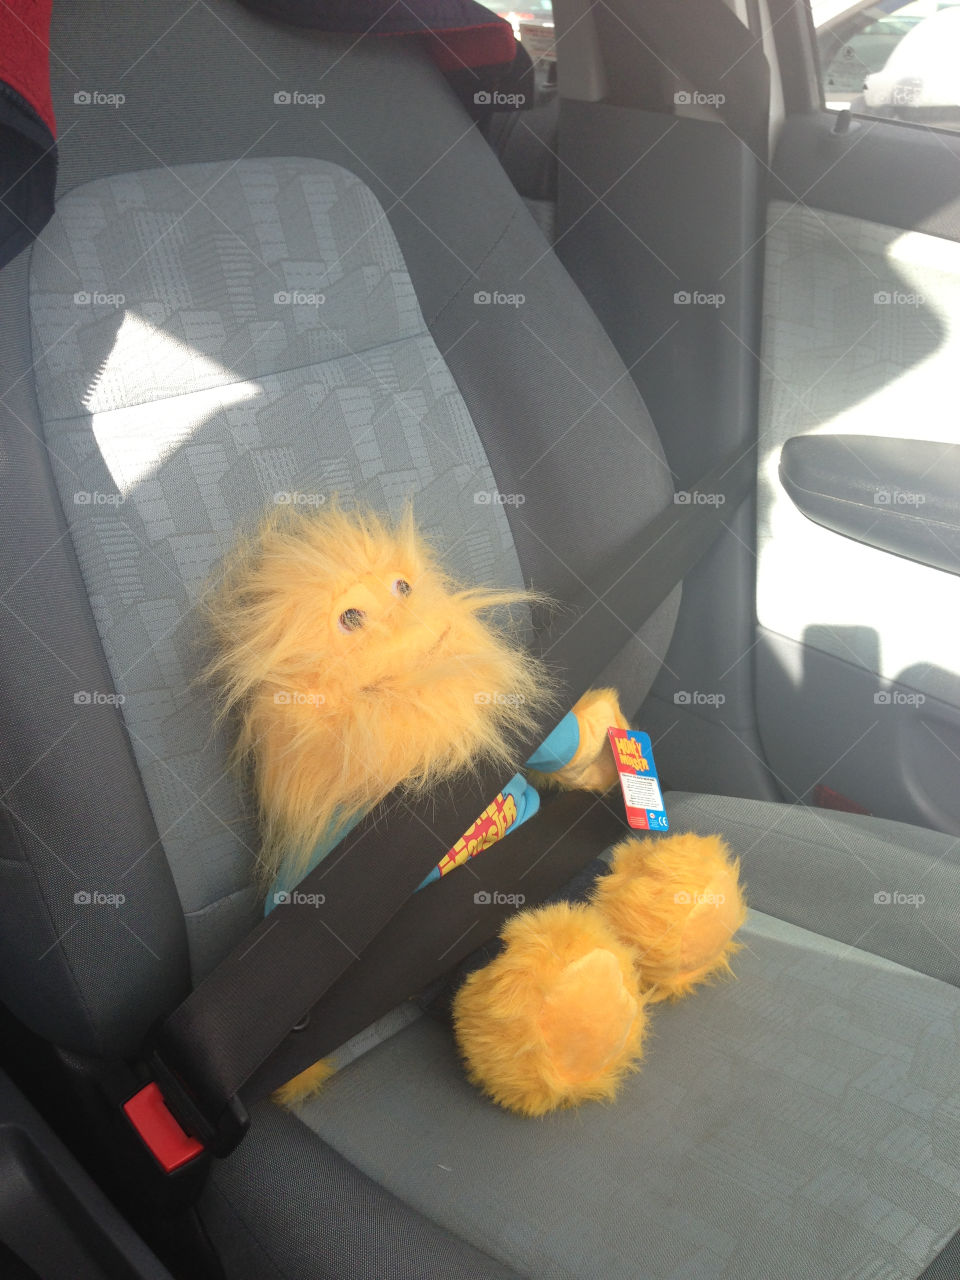  Honey monster shotgun . Me and a friend go for a ride in my car